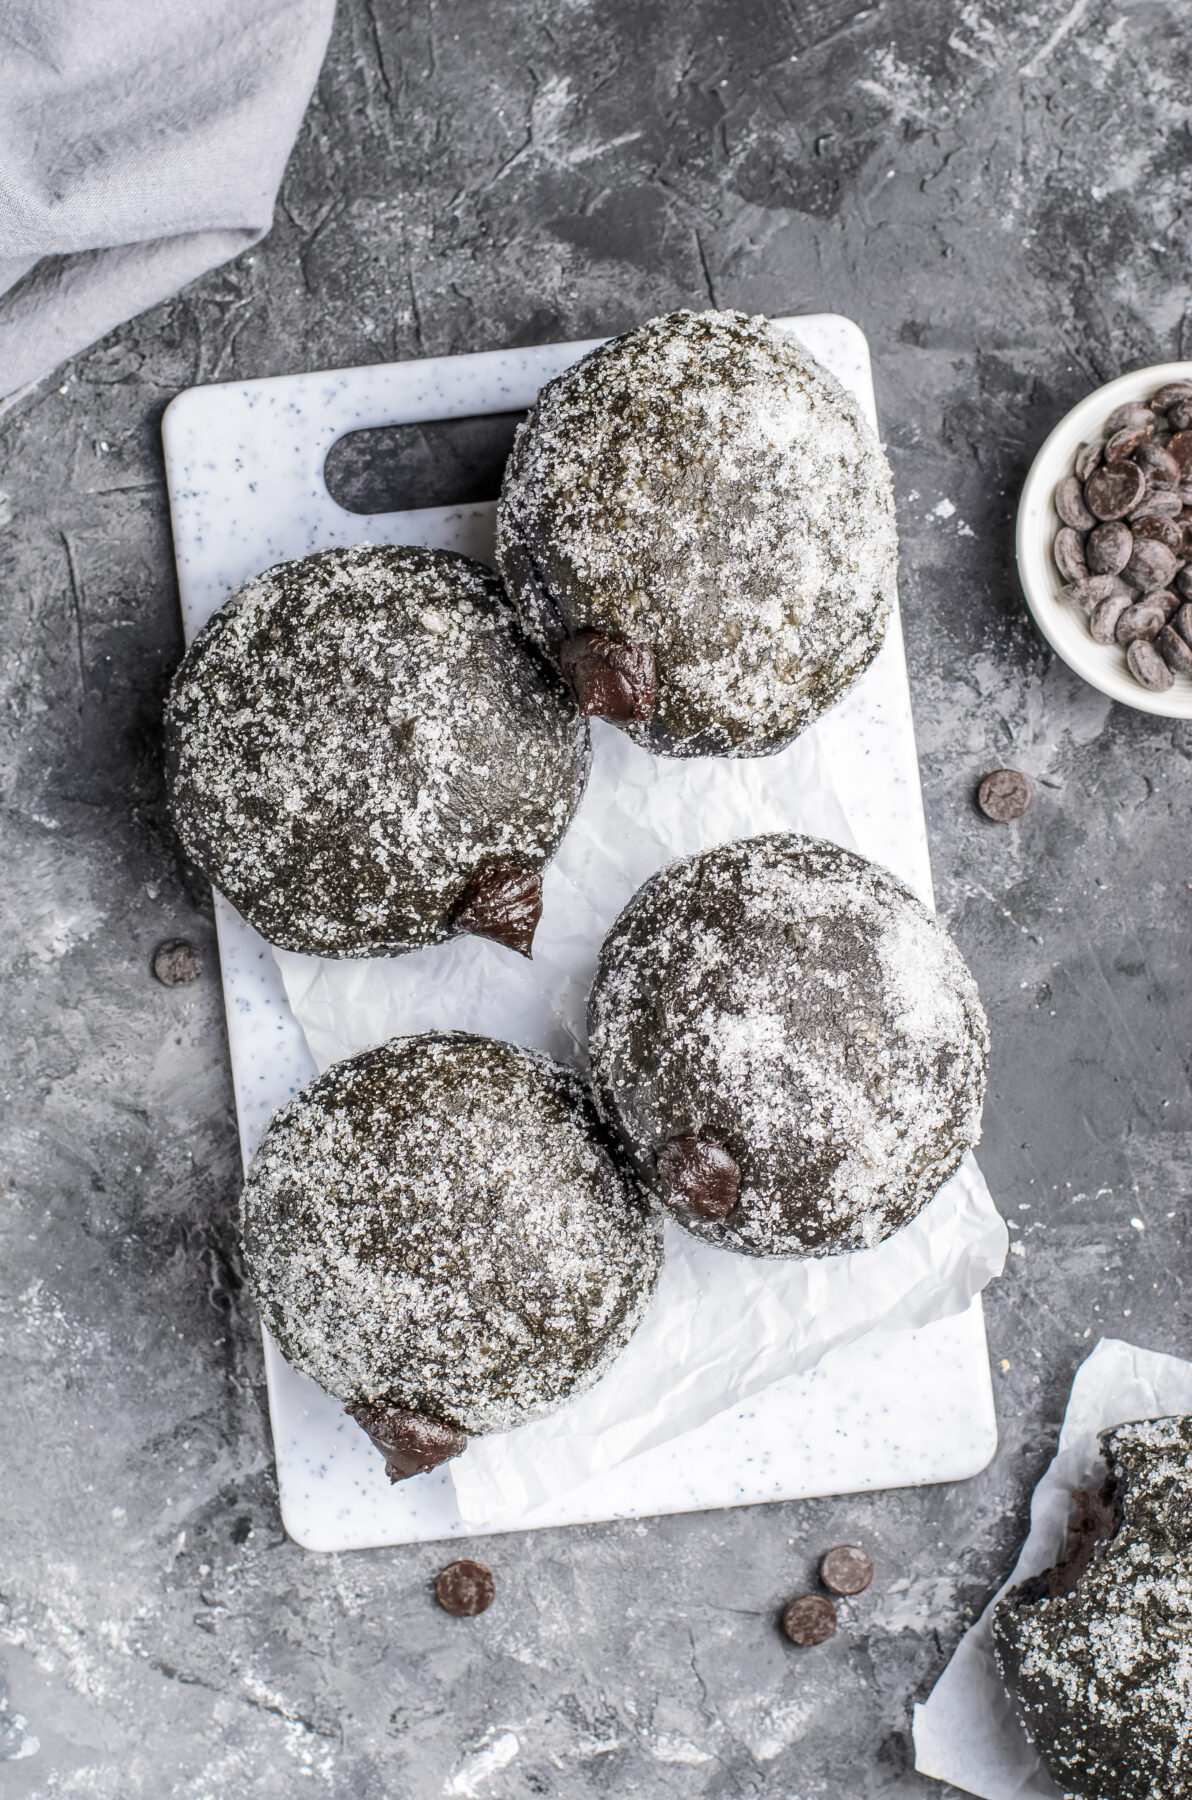 Light and crisp, these Black Charcoal Donuts with Dark Chocolate Custard are made with charcoal and filled with rich dark chocolate custard.